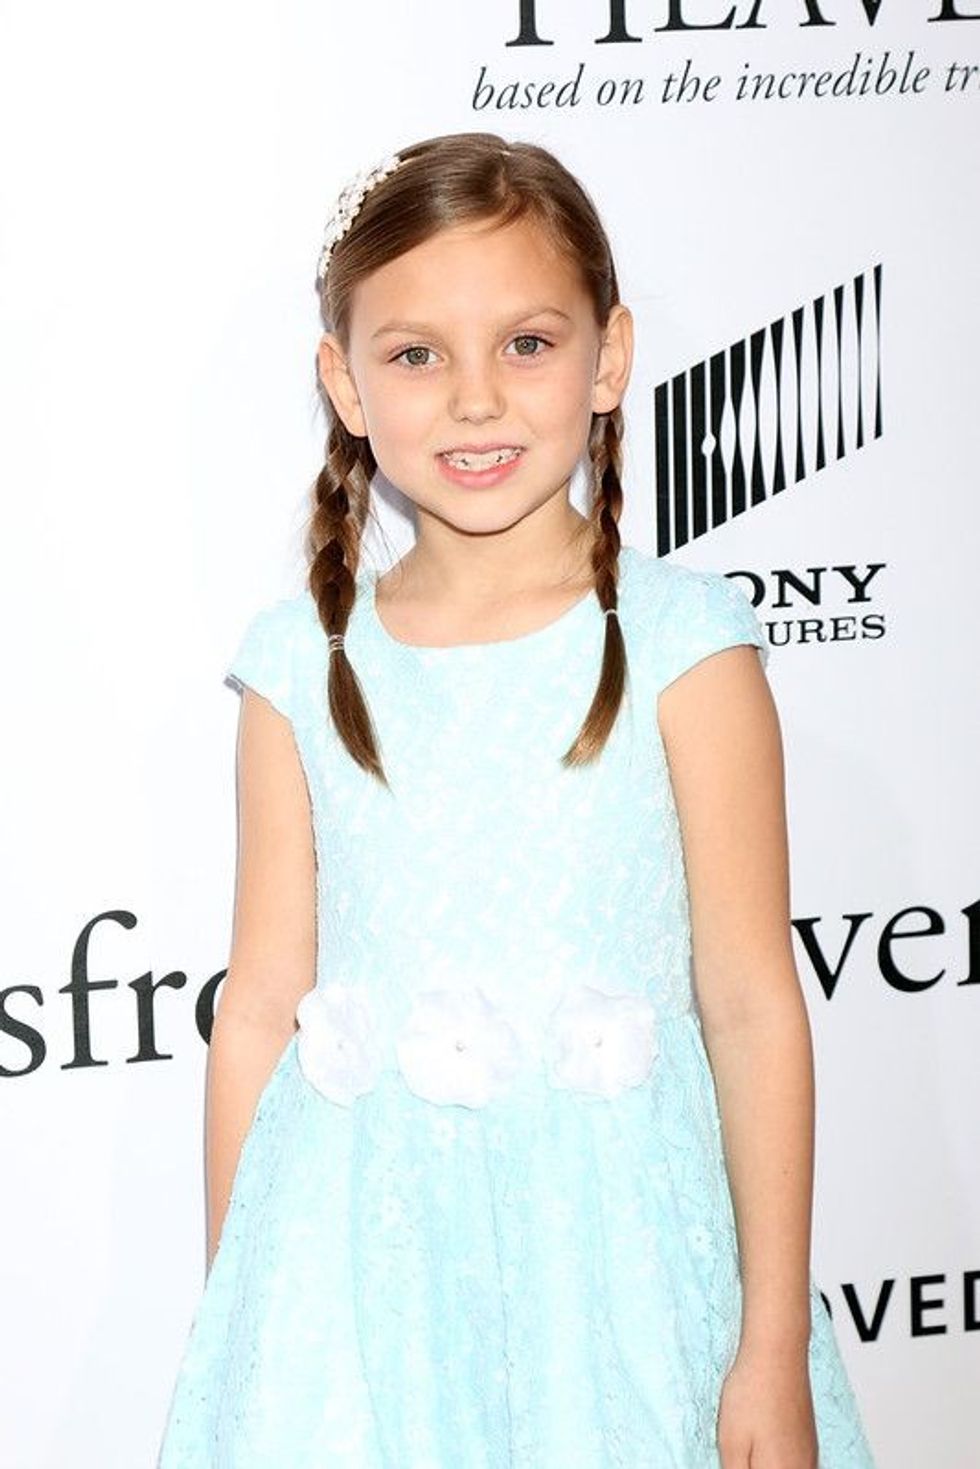 Courtney Fansler attended the 'Miracles From Heaven' premiere on March 9 at the ArcLight Hollywood Theaters in Los Angeles, California.